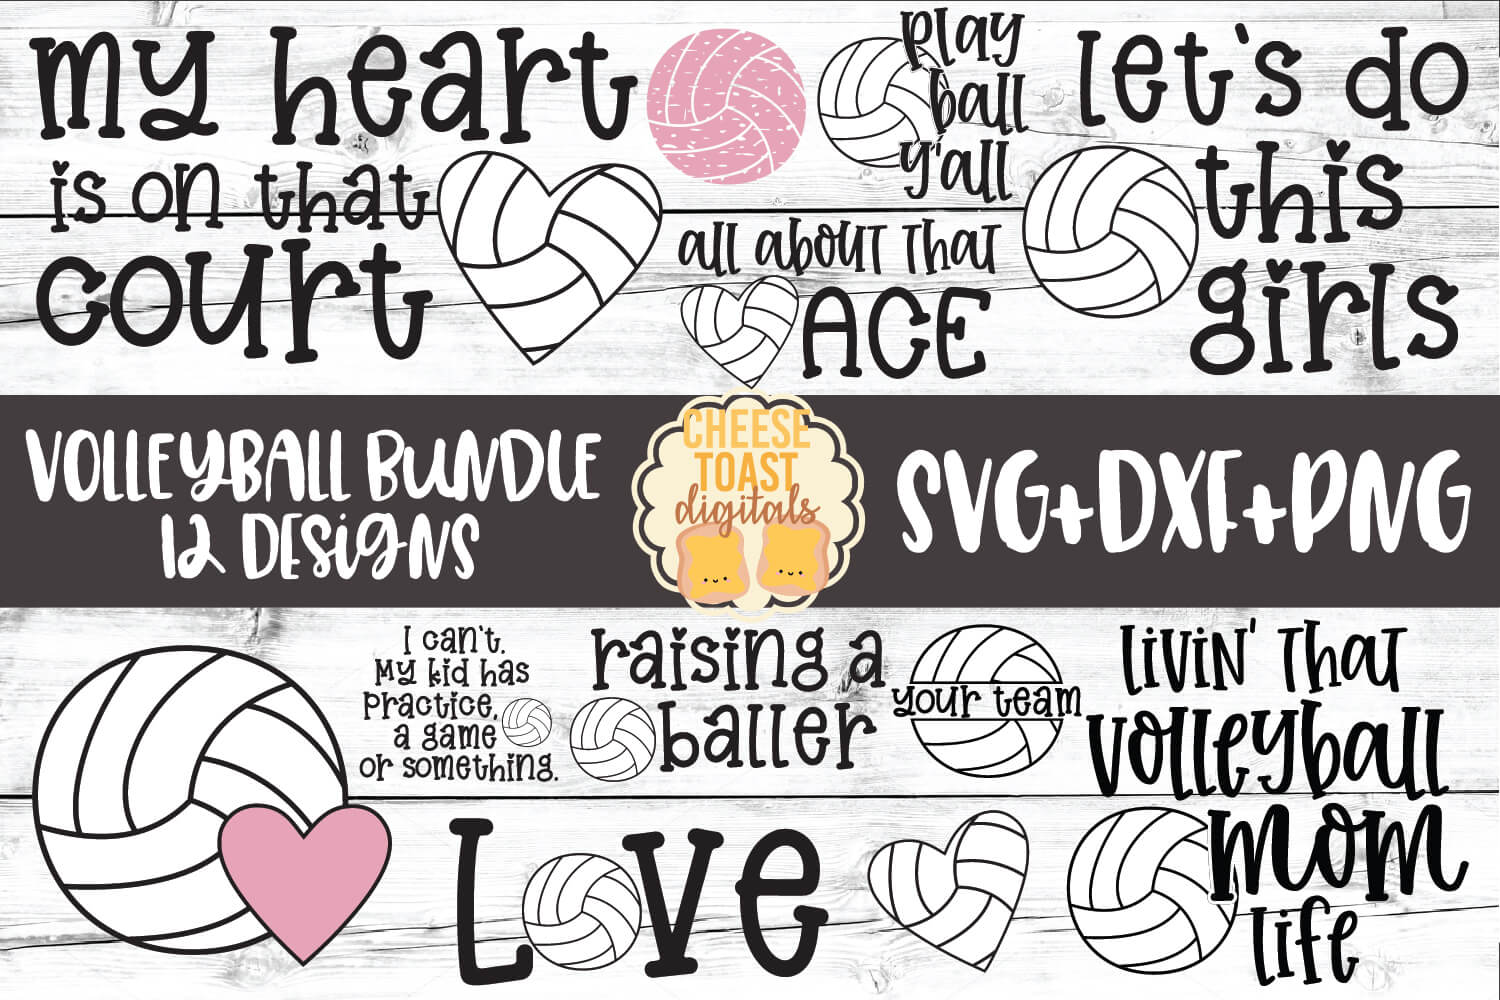 Download Volleyball Bundle - 12 Designs - SVG PNG DXF Cut Files ...